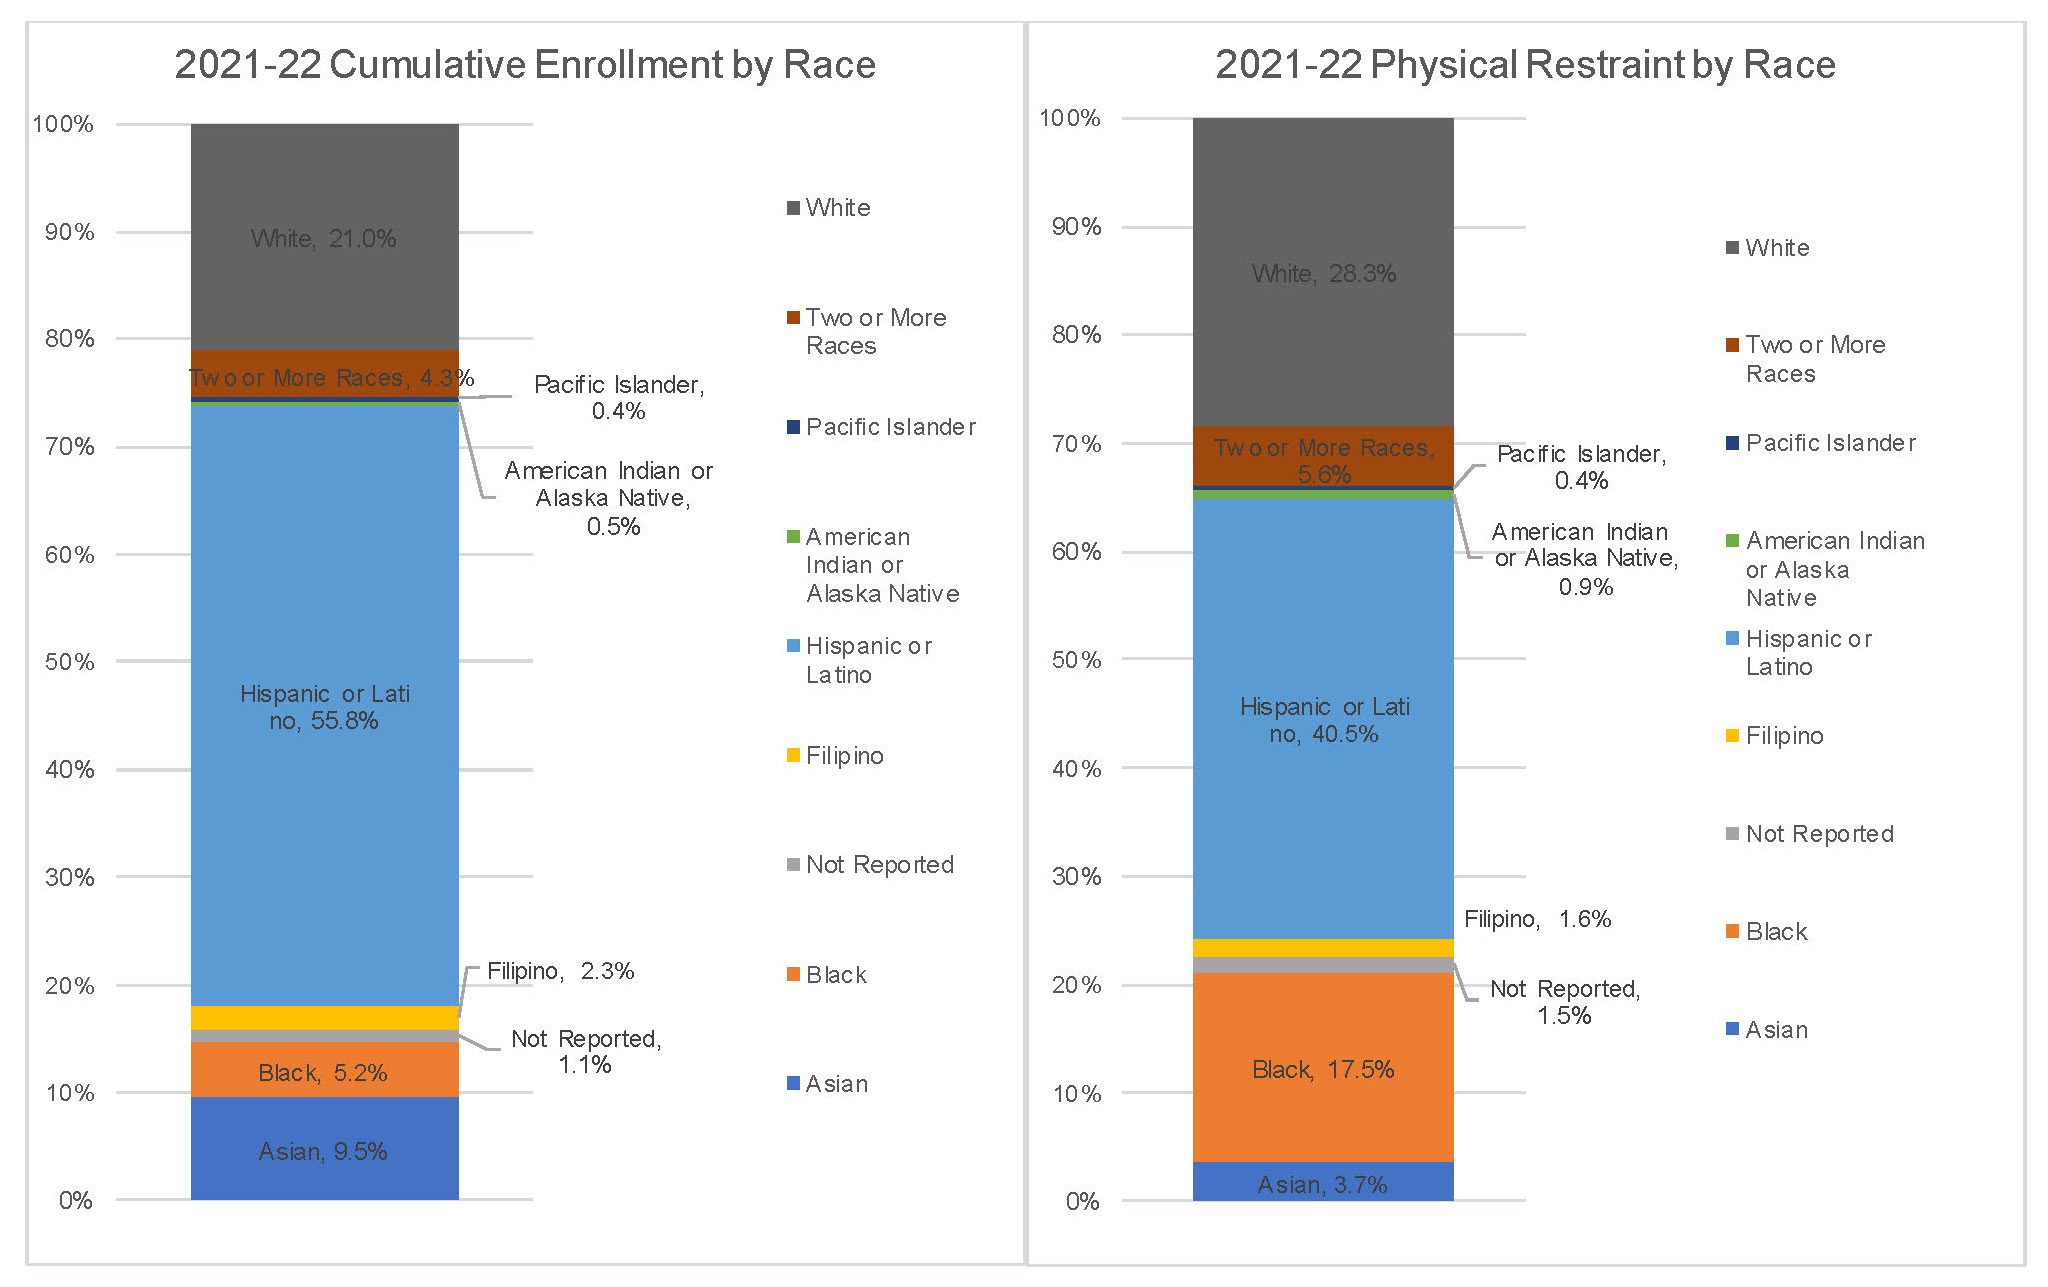 The image on the left is a bar graph depicting 2021-22 cumulative student enrollment by race. Each race is represented by a color. The image on the right is a bar graph depicting 2021-22 physical restraint counts by race. The two graphs are next to each other to compare a student population’s share of cumulative enrollment versus their share of total physical restraints. White students (dark gray bar) were 21.0% of total enrollment and made up 28.3% of all physical restraints; Students of two or more races (dark orange) were 4.3% of the student population and made up 5.6% of all physical restraints; Pacific Islander students (navy blue) were 0.4% of total enrollment and made up 0.4% of all physical restraints; American Indian or Alaska Native students (green) were 0.5% of total enrollment and 0.9% of all physical restraints; Hispanic/LatinX students (light blue) were 55.8% of total enrollment and made up 40.5% of all physical restraints; Filipino students (yellow) were 2.3% of total enrollment and made up 1.6% of all physical restraints; Students whose race was not reported (light gray) were 1.1% of total enrollment and made up 1.5% of all physical restraints; Black students (orange) were 5.2% of total enrollment and made up 17.5% of all physical restraints; and Asian students (dark blue) were 9.5% of total enrollment and made up 3.7% of all physical restraints.